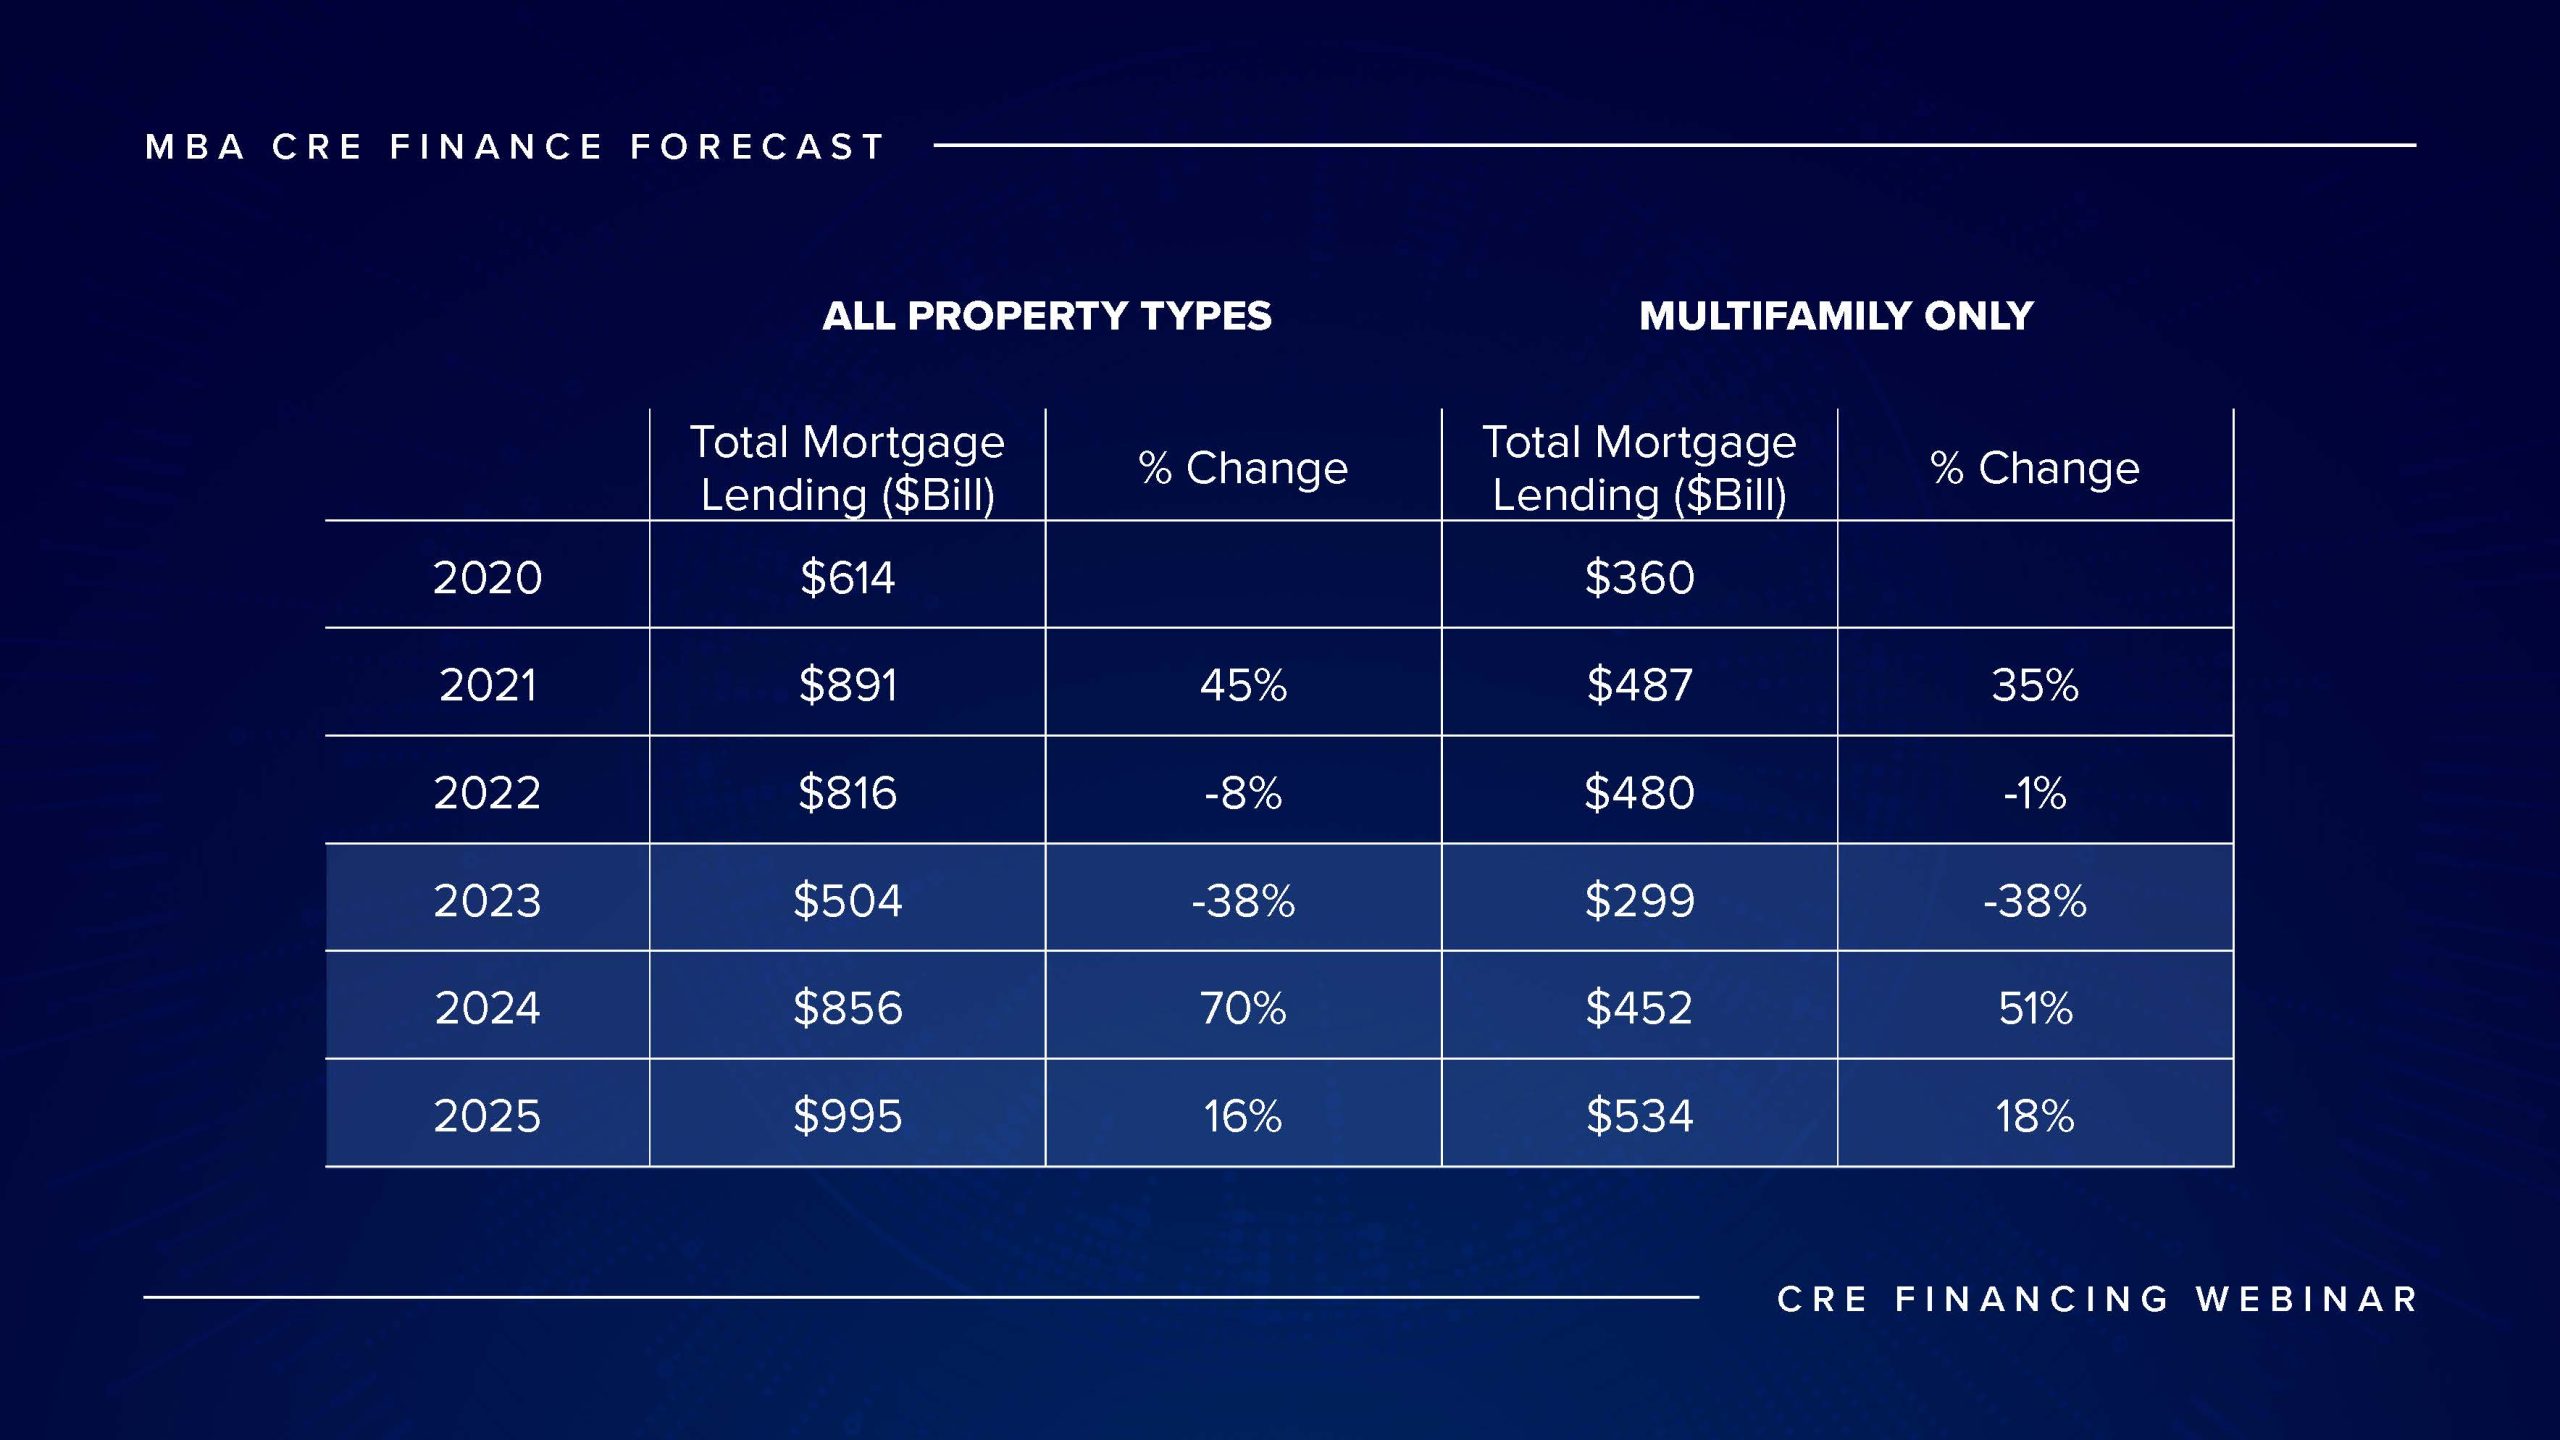 CRE Financing Forecast by MBA